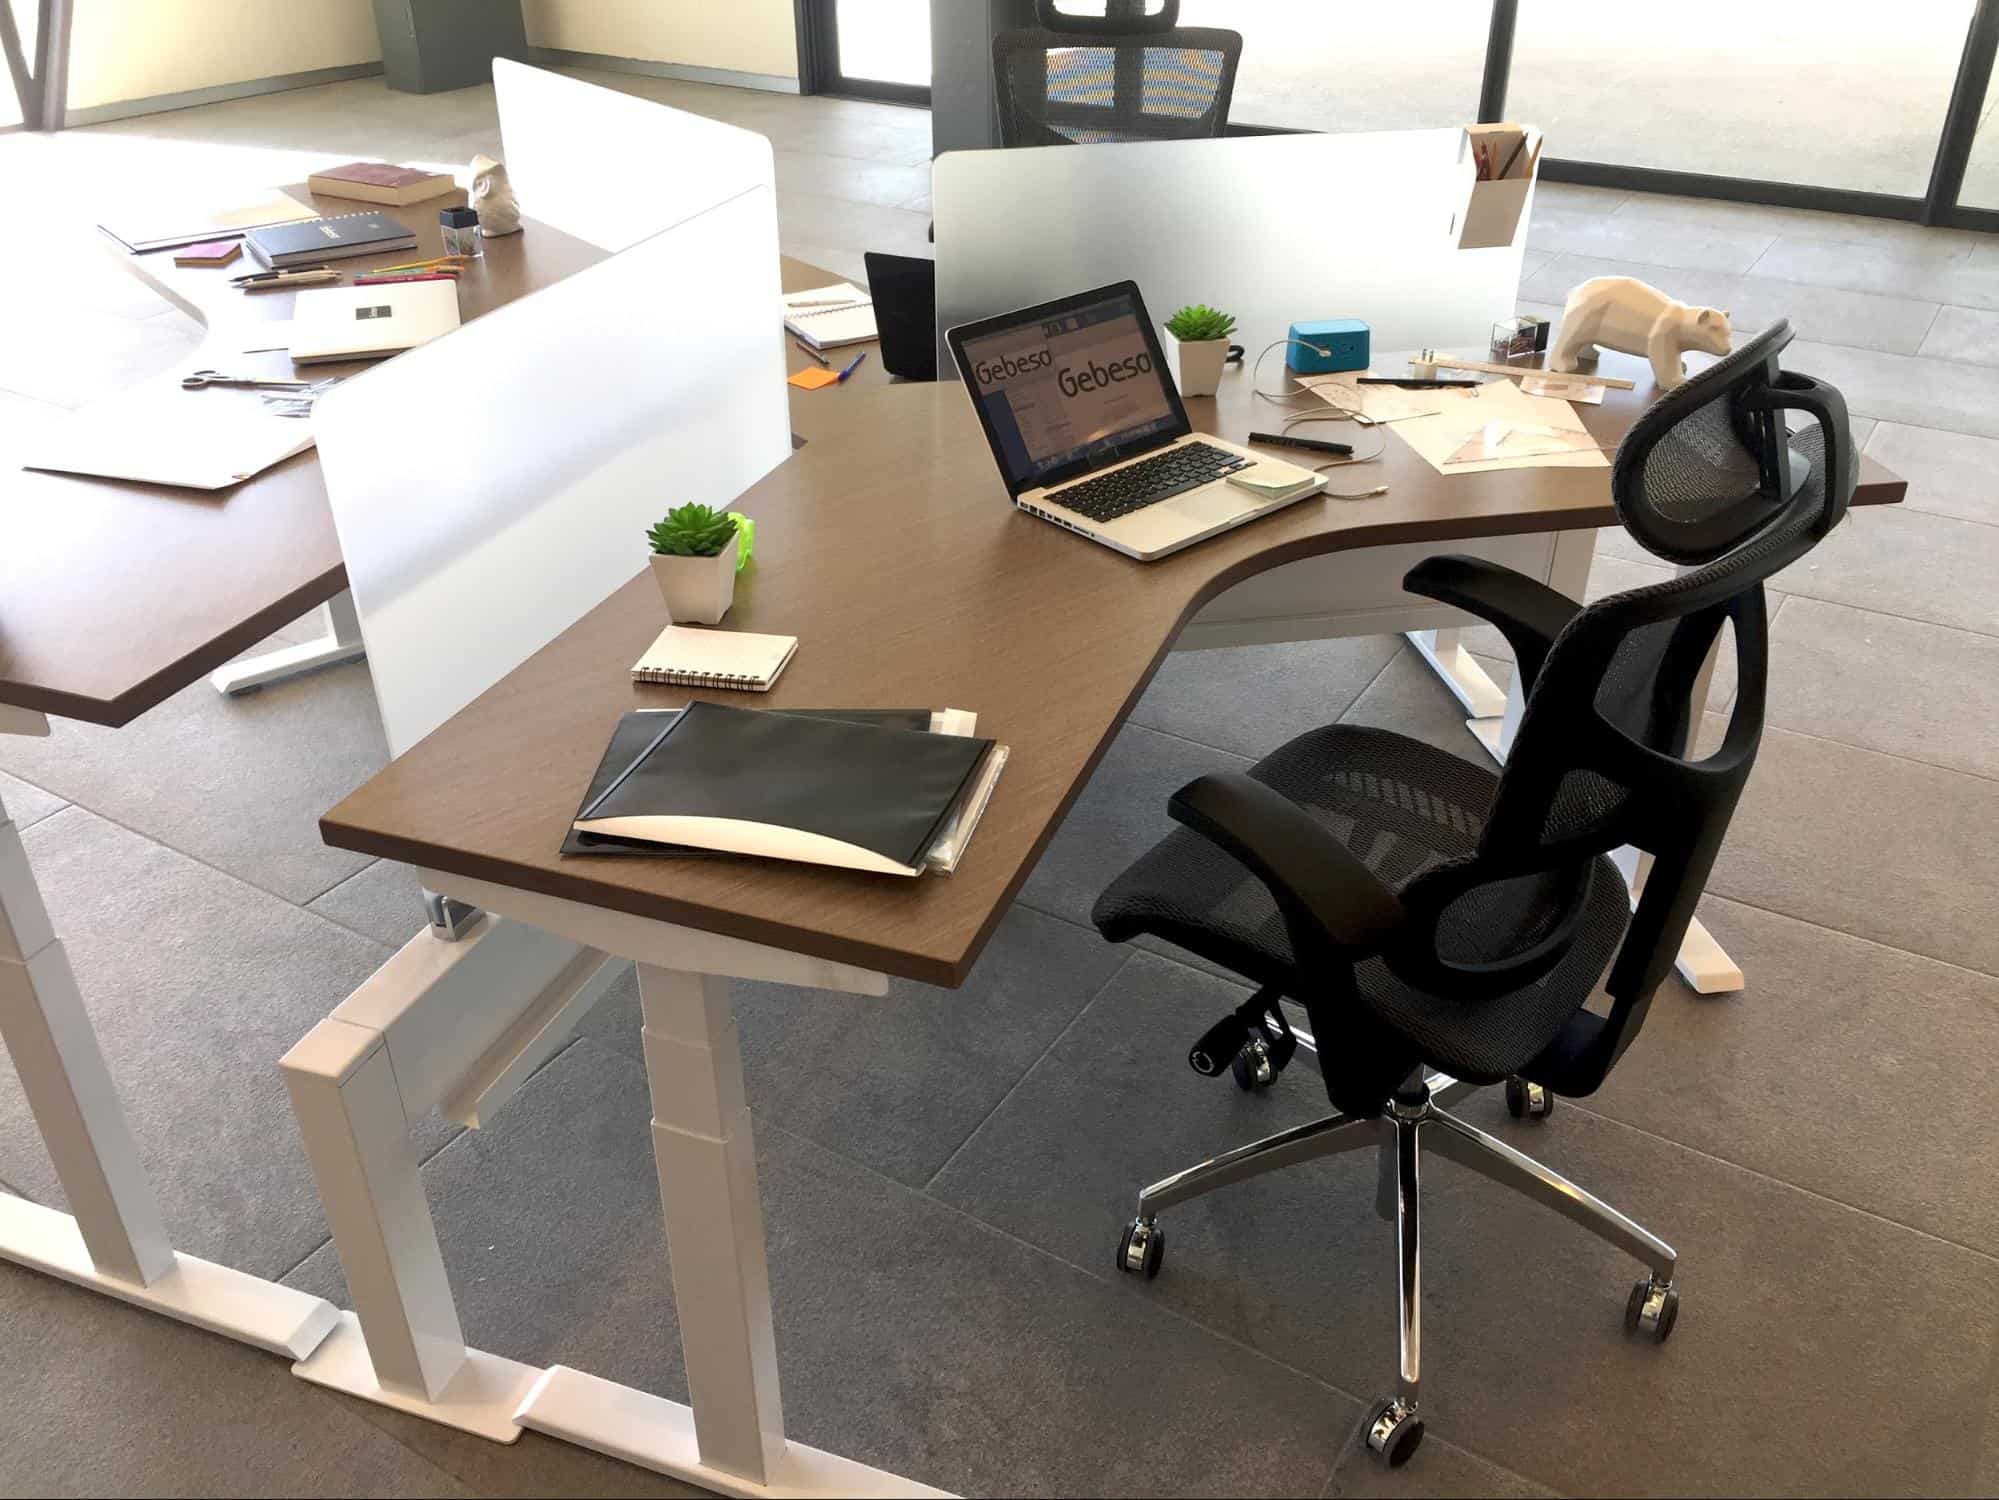 Ergonomic Office Furniture Buying Guide: What to Look For